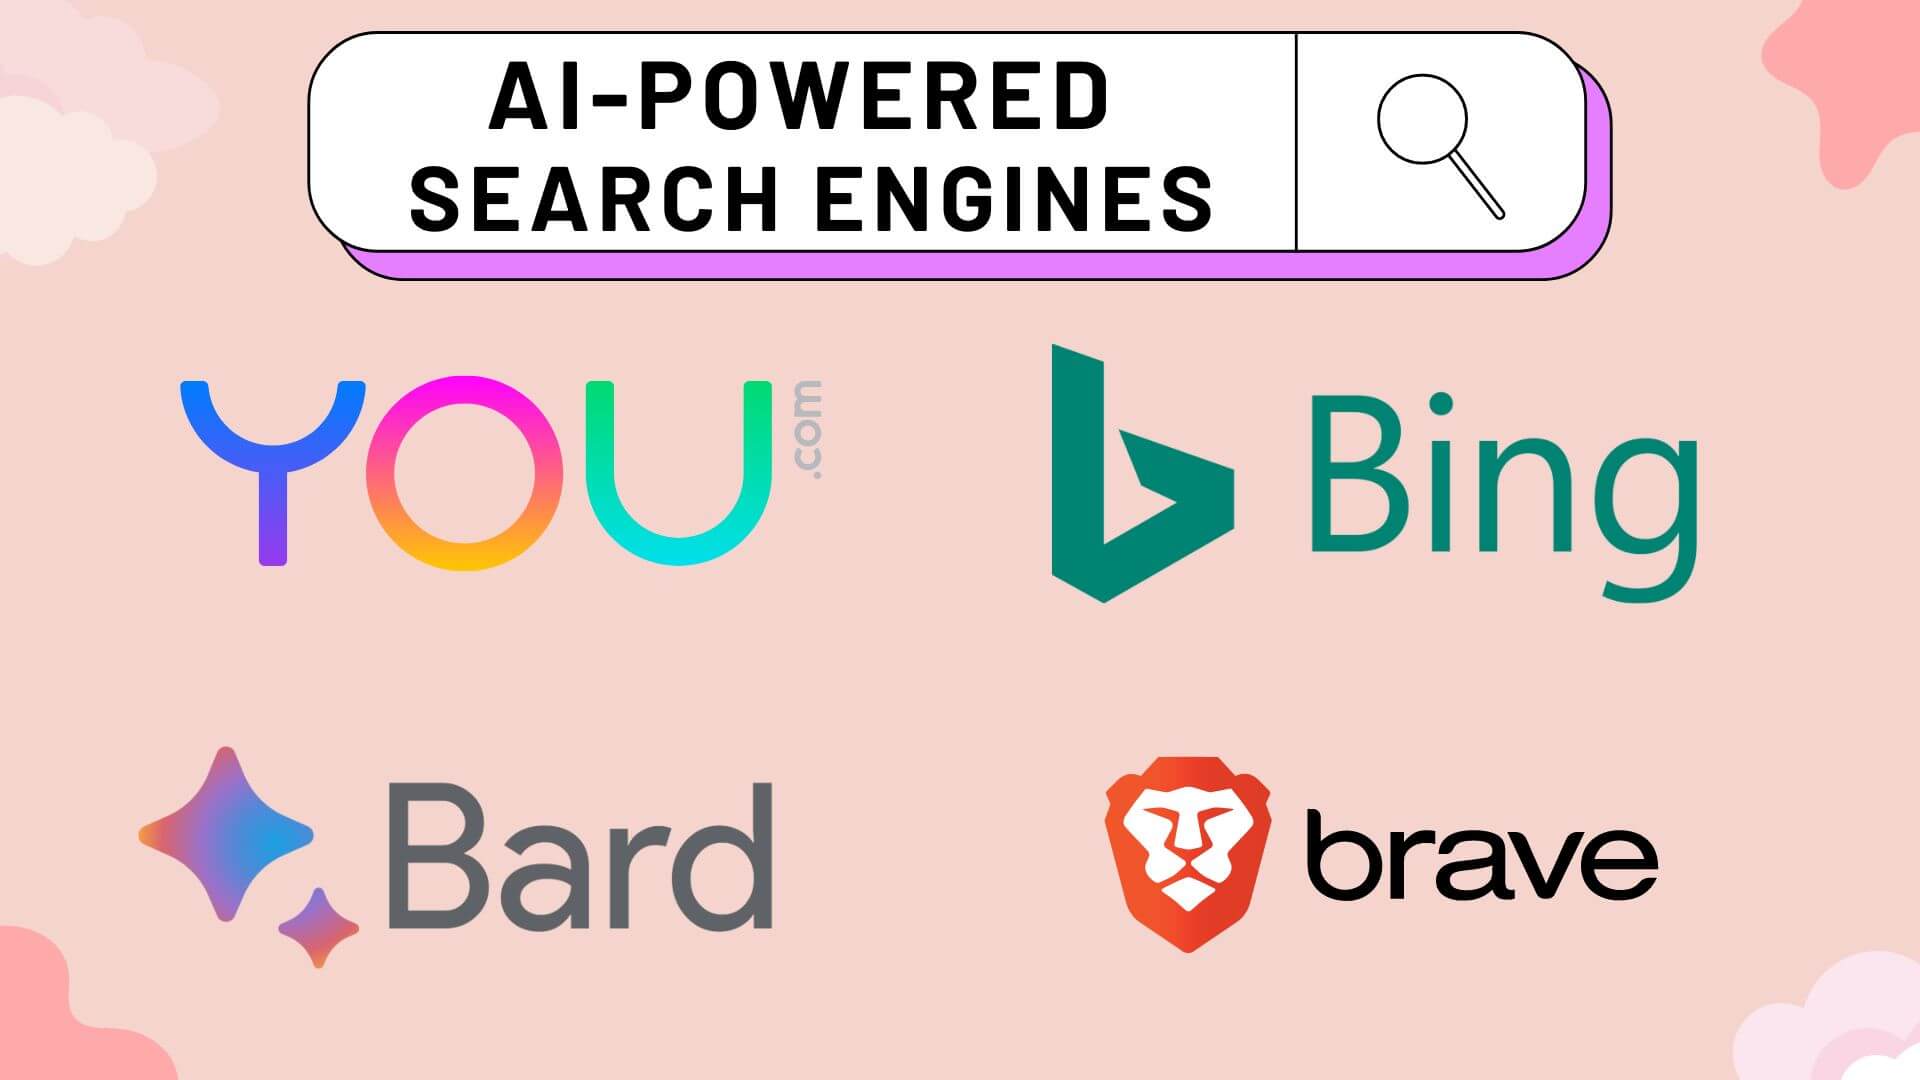 Creative Showing Top AI search engines includes You, Bing, Bard, Brave AI